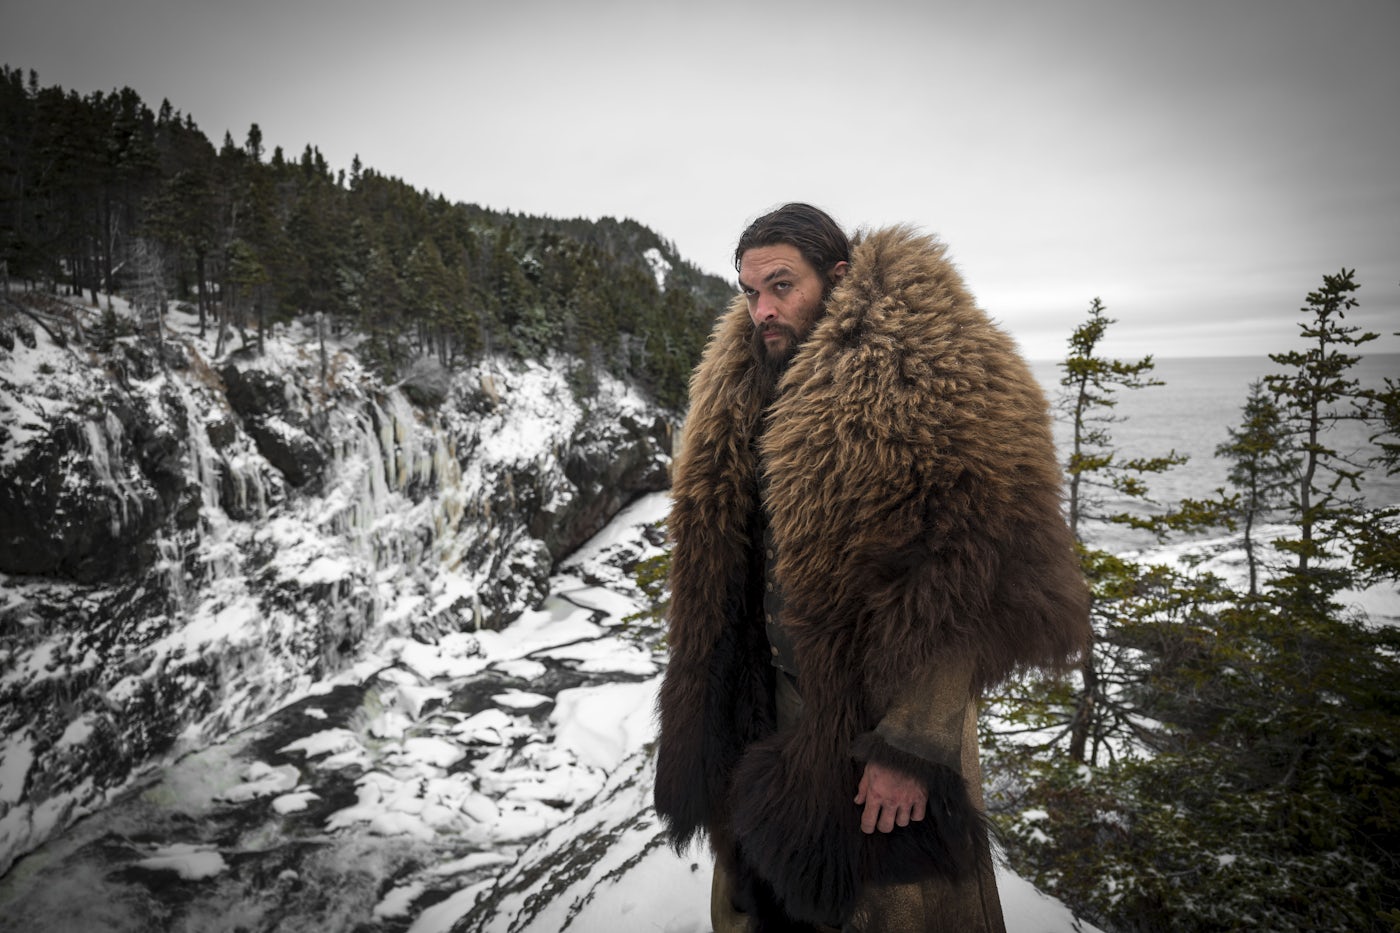 On The Roam - Momoa Pro LV – The Frontier - Adventure at its core